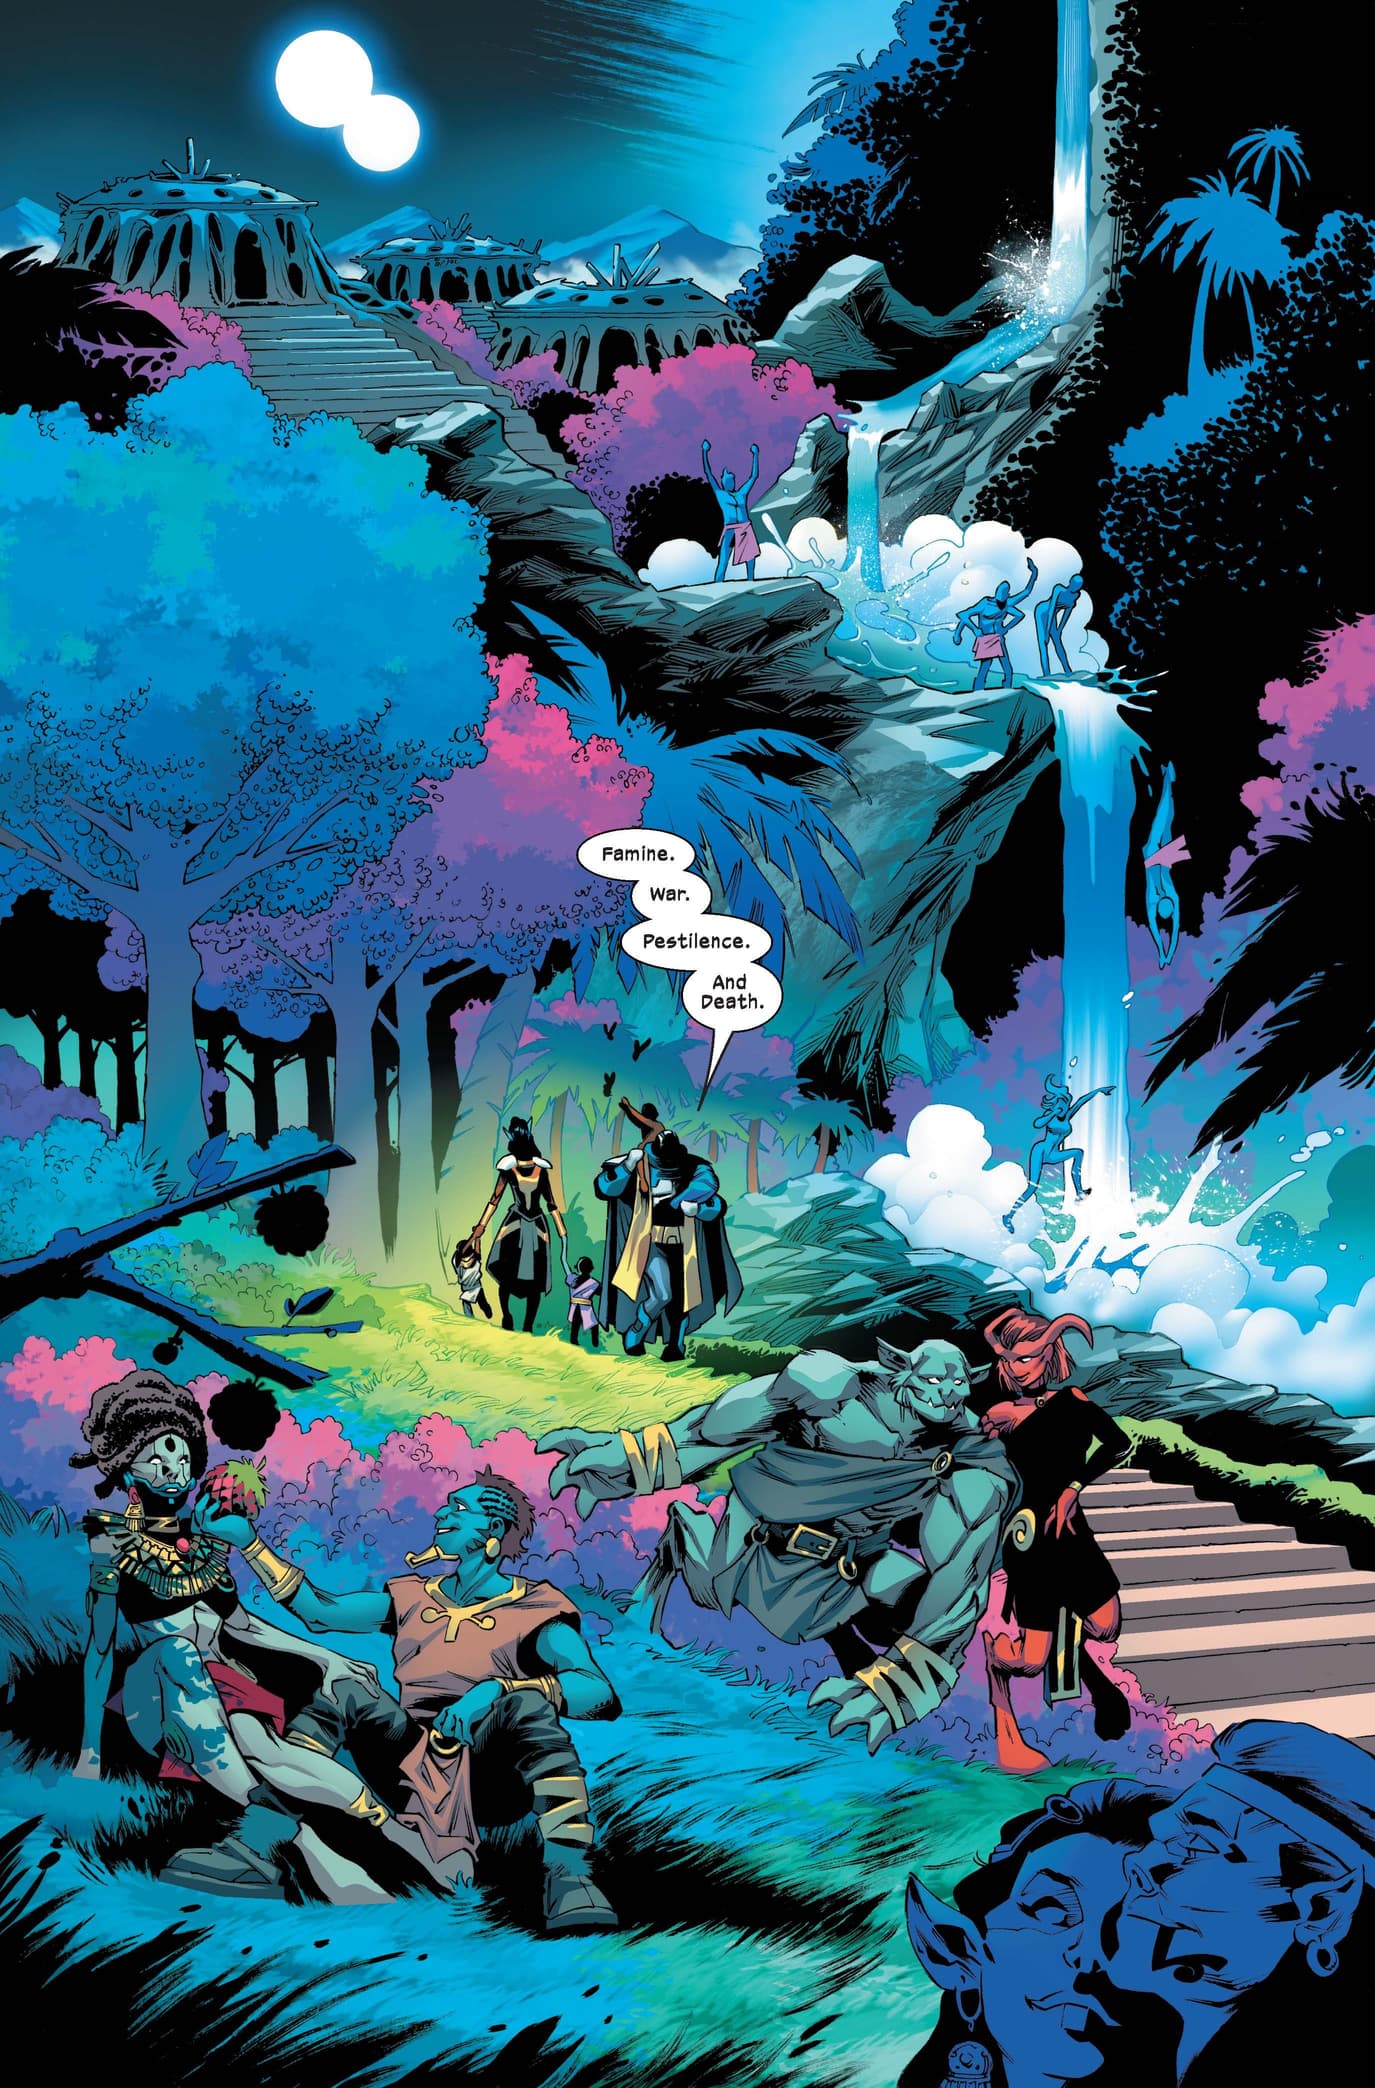 X-MEN: BEFORE THE FALL - HERALDS OF APOCALYPSE (2023) #1 page by Al Ewing and Luca Pizzari